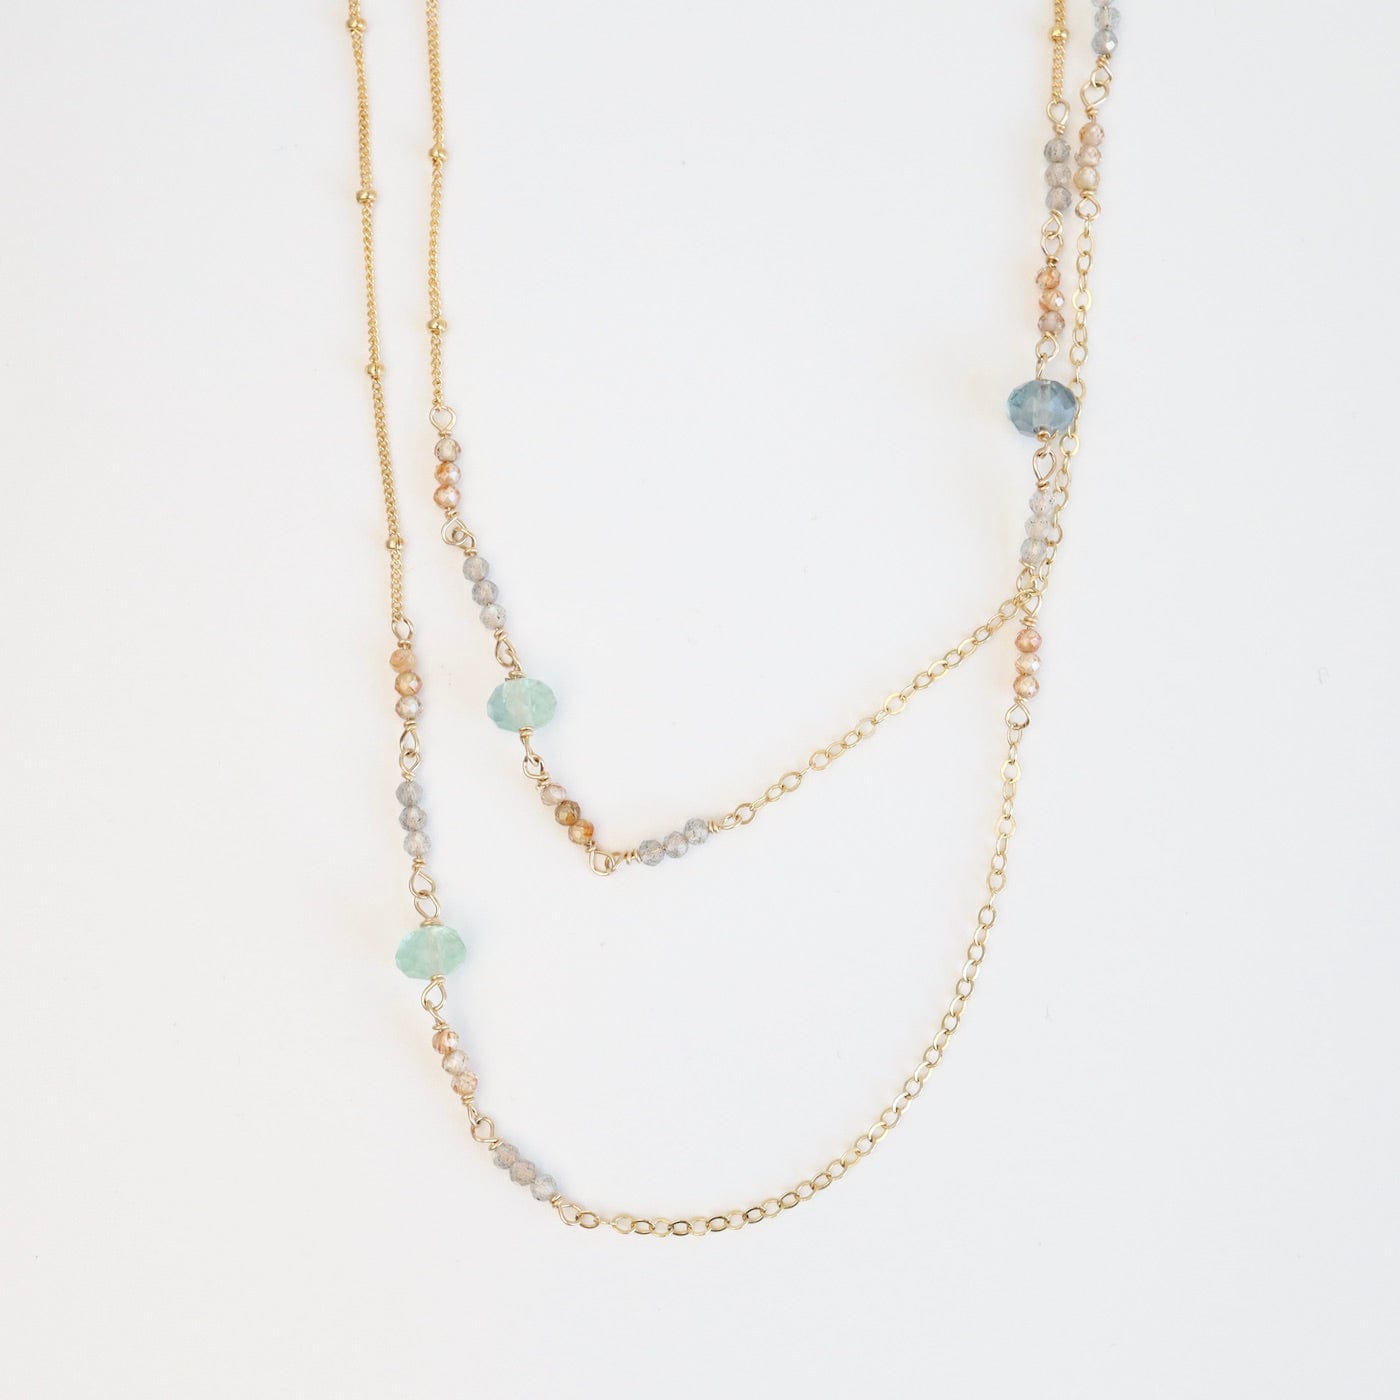 NKL-GF 36" Mixed Gold Filled Chain with Stations of Flourite Necklace